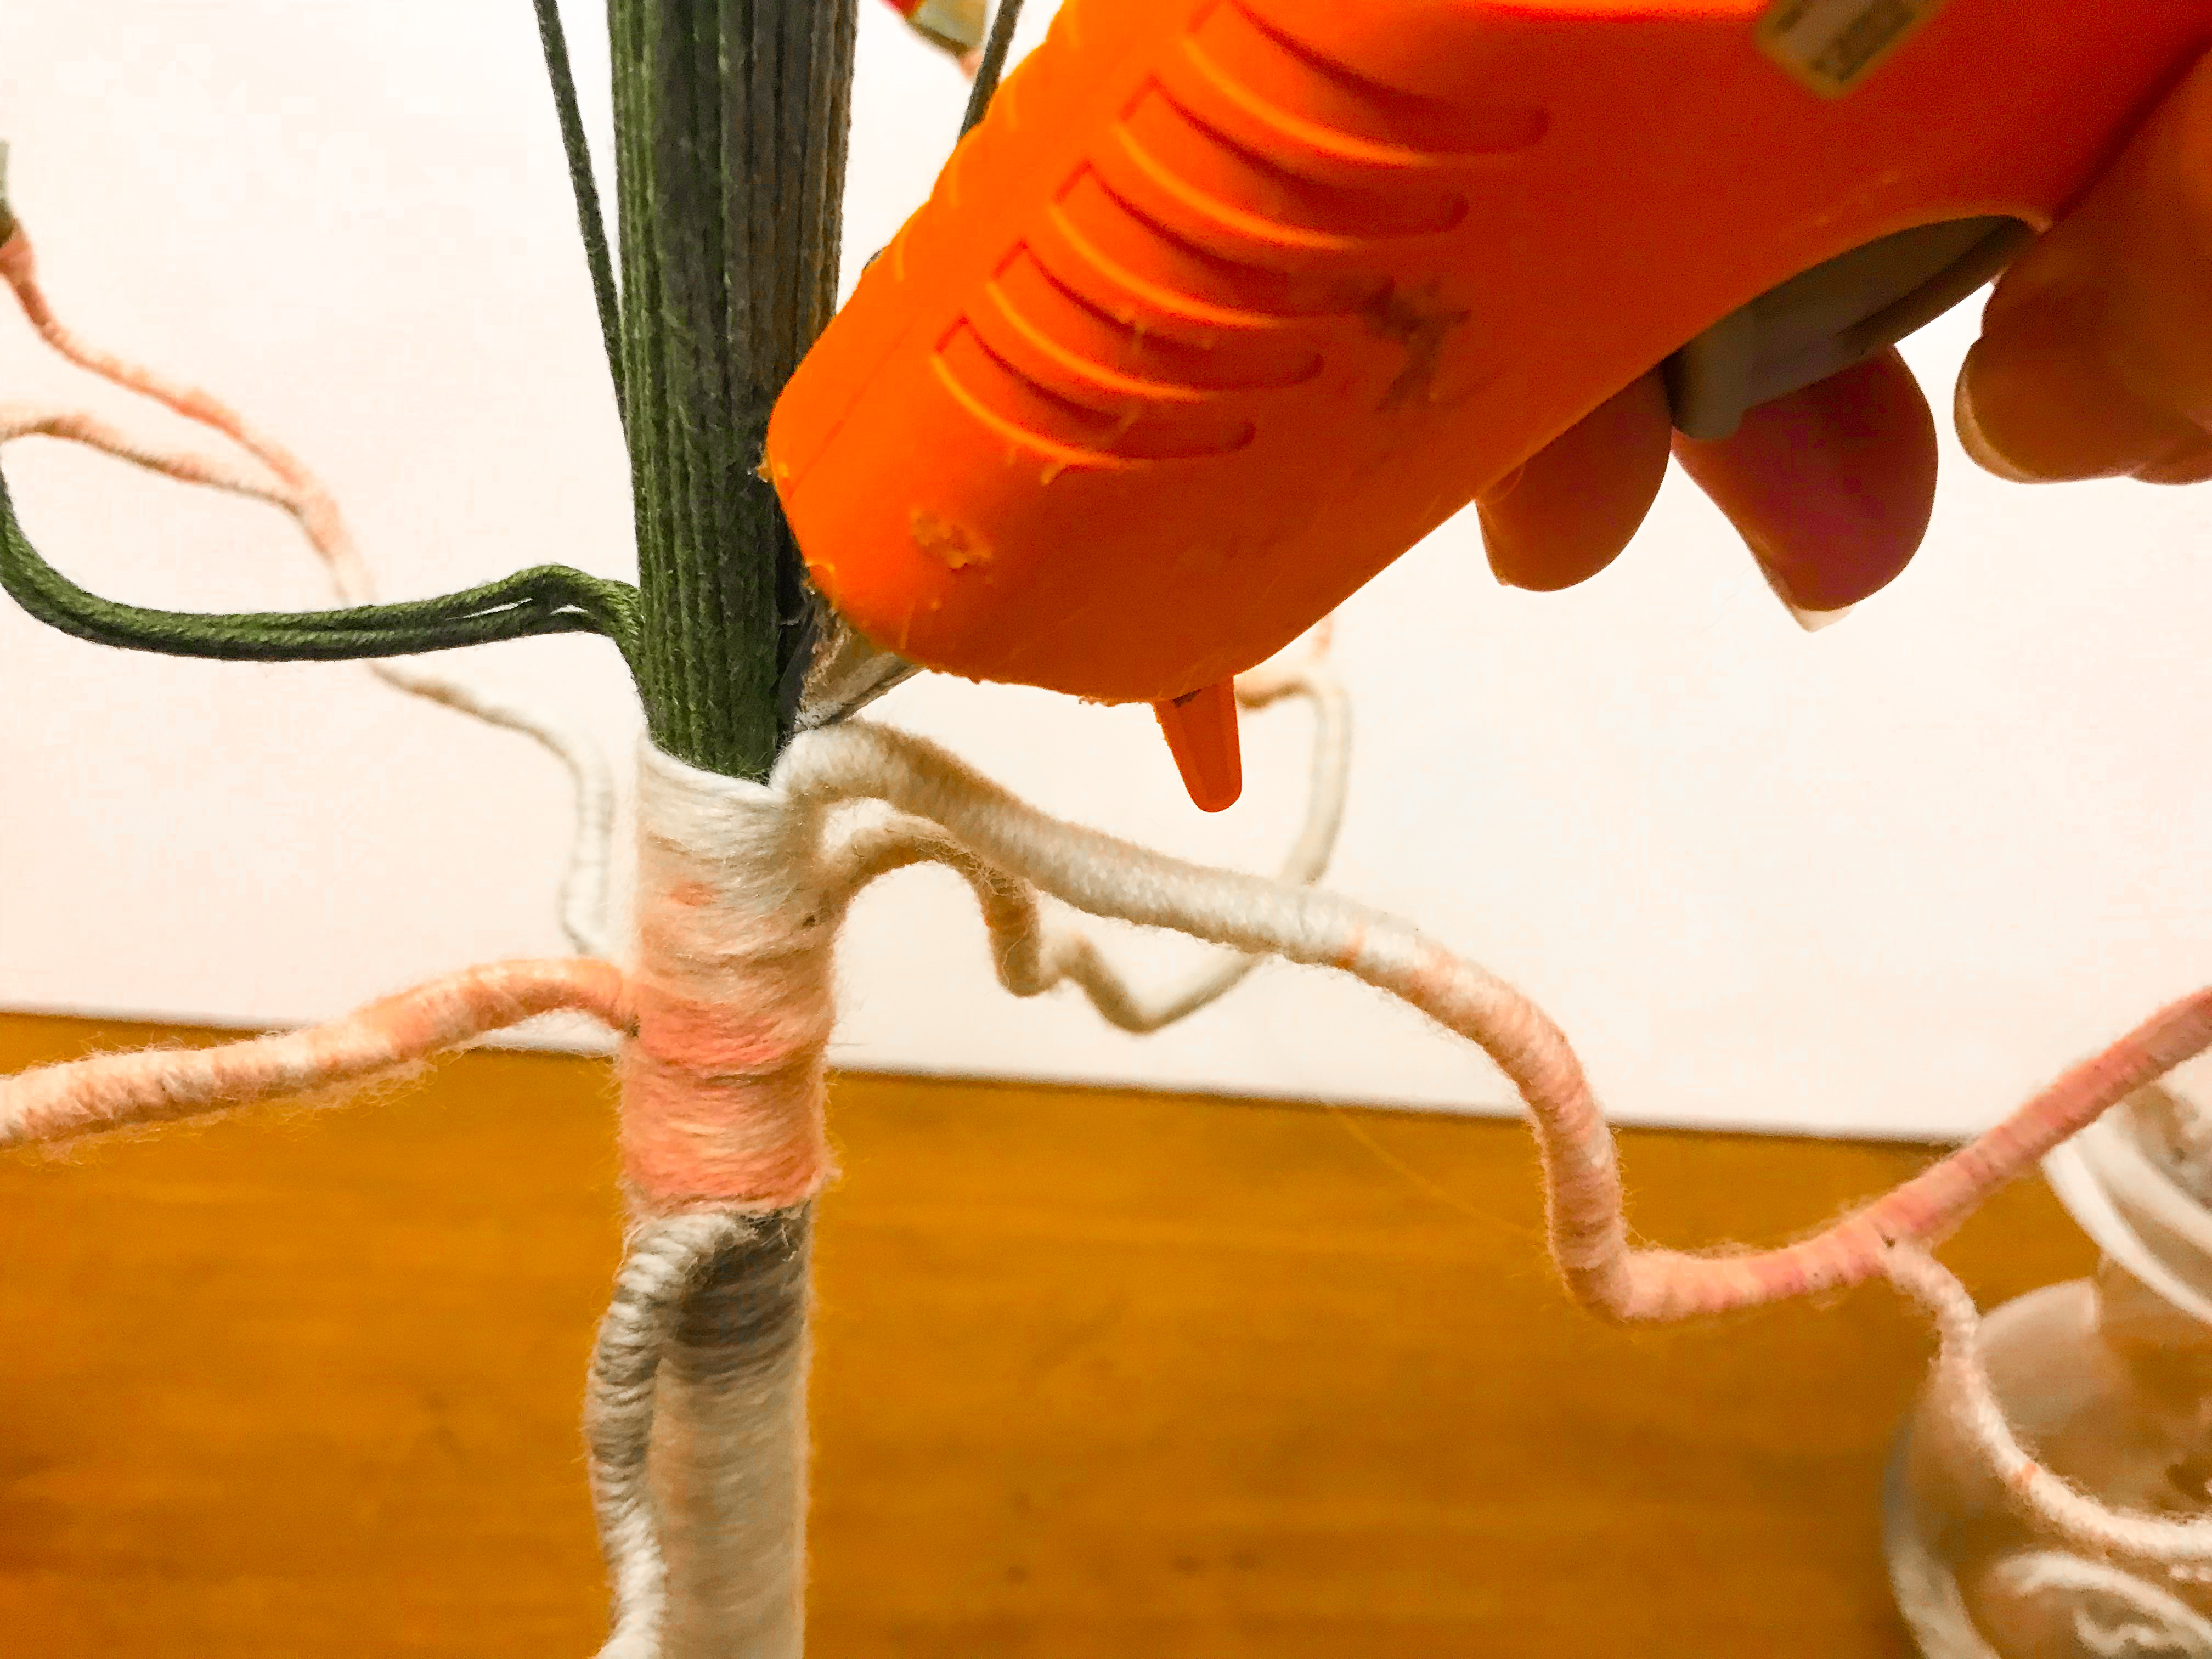 Hot glue gun adding hot glue to junction where yarn wrapped branch meets unwrapped floral stem trunk. 